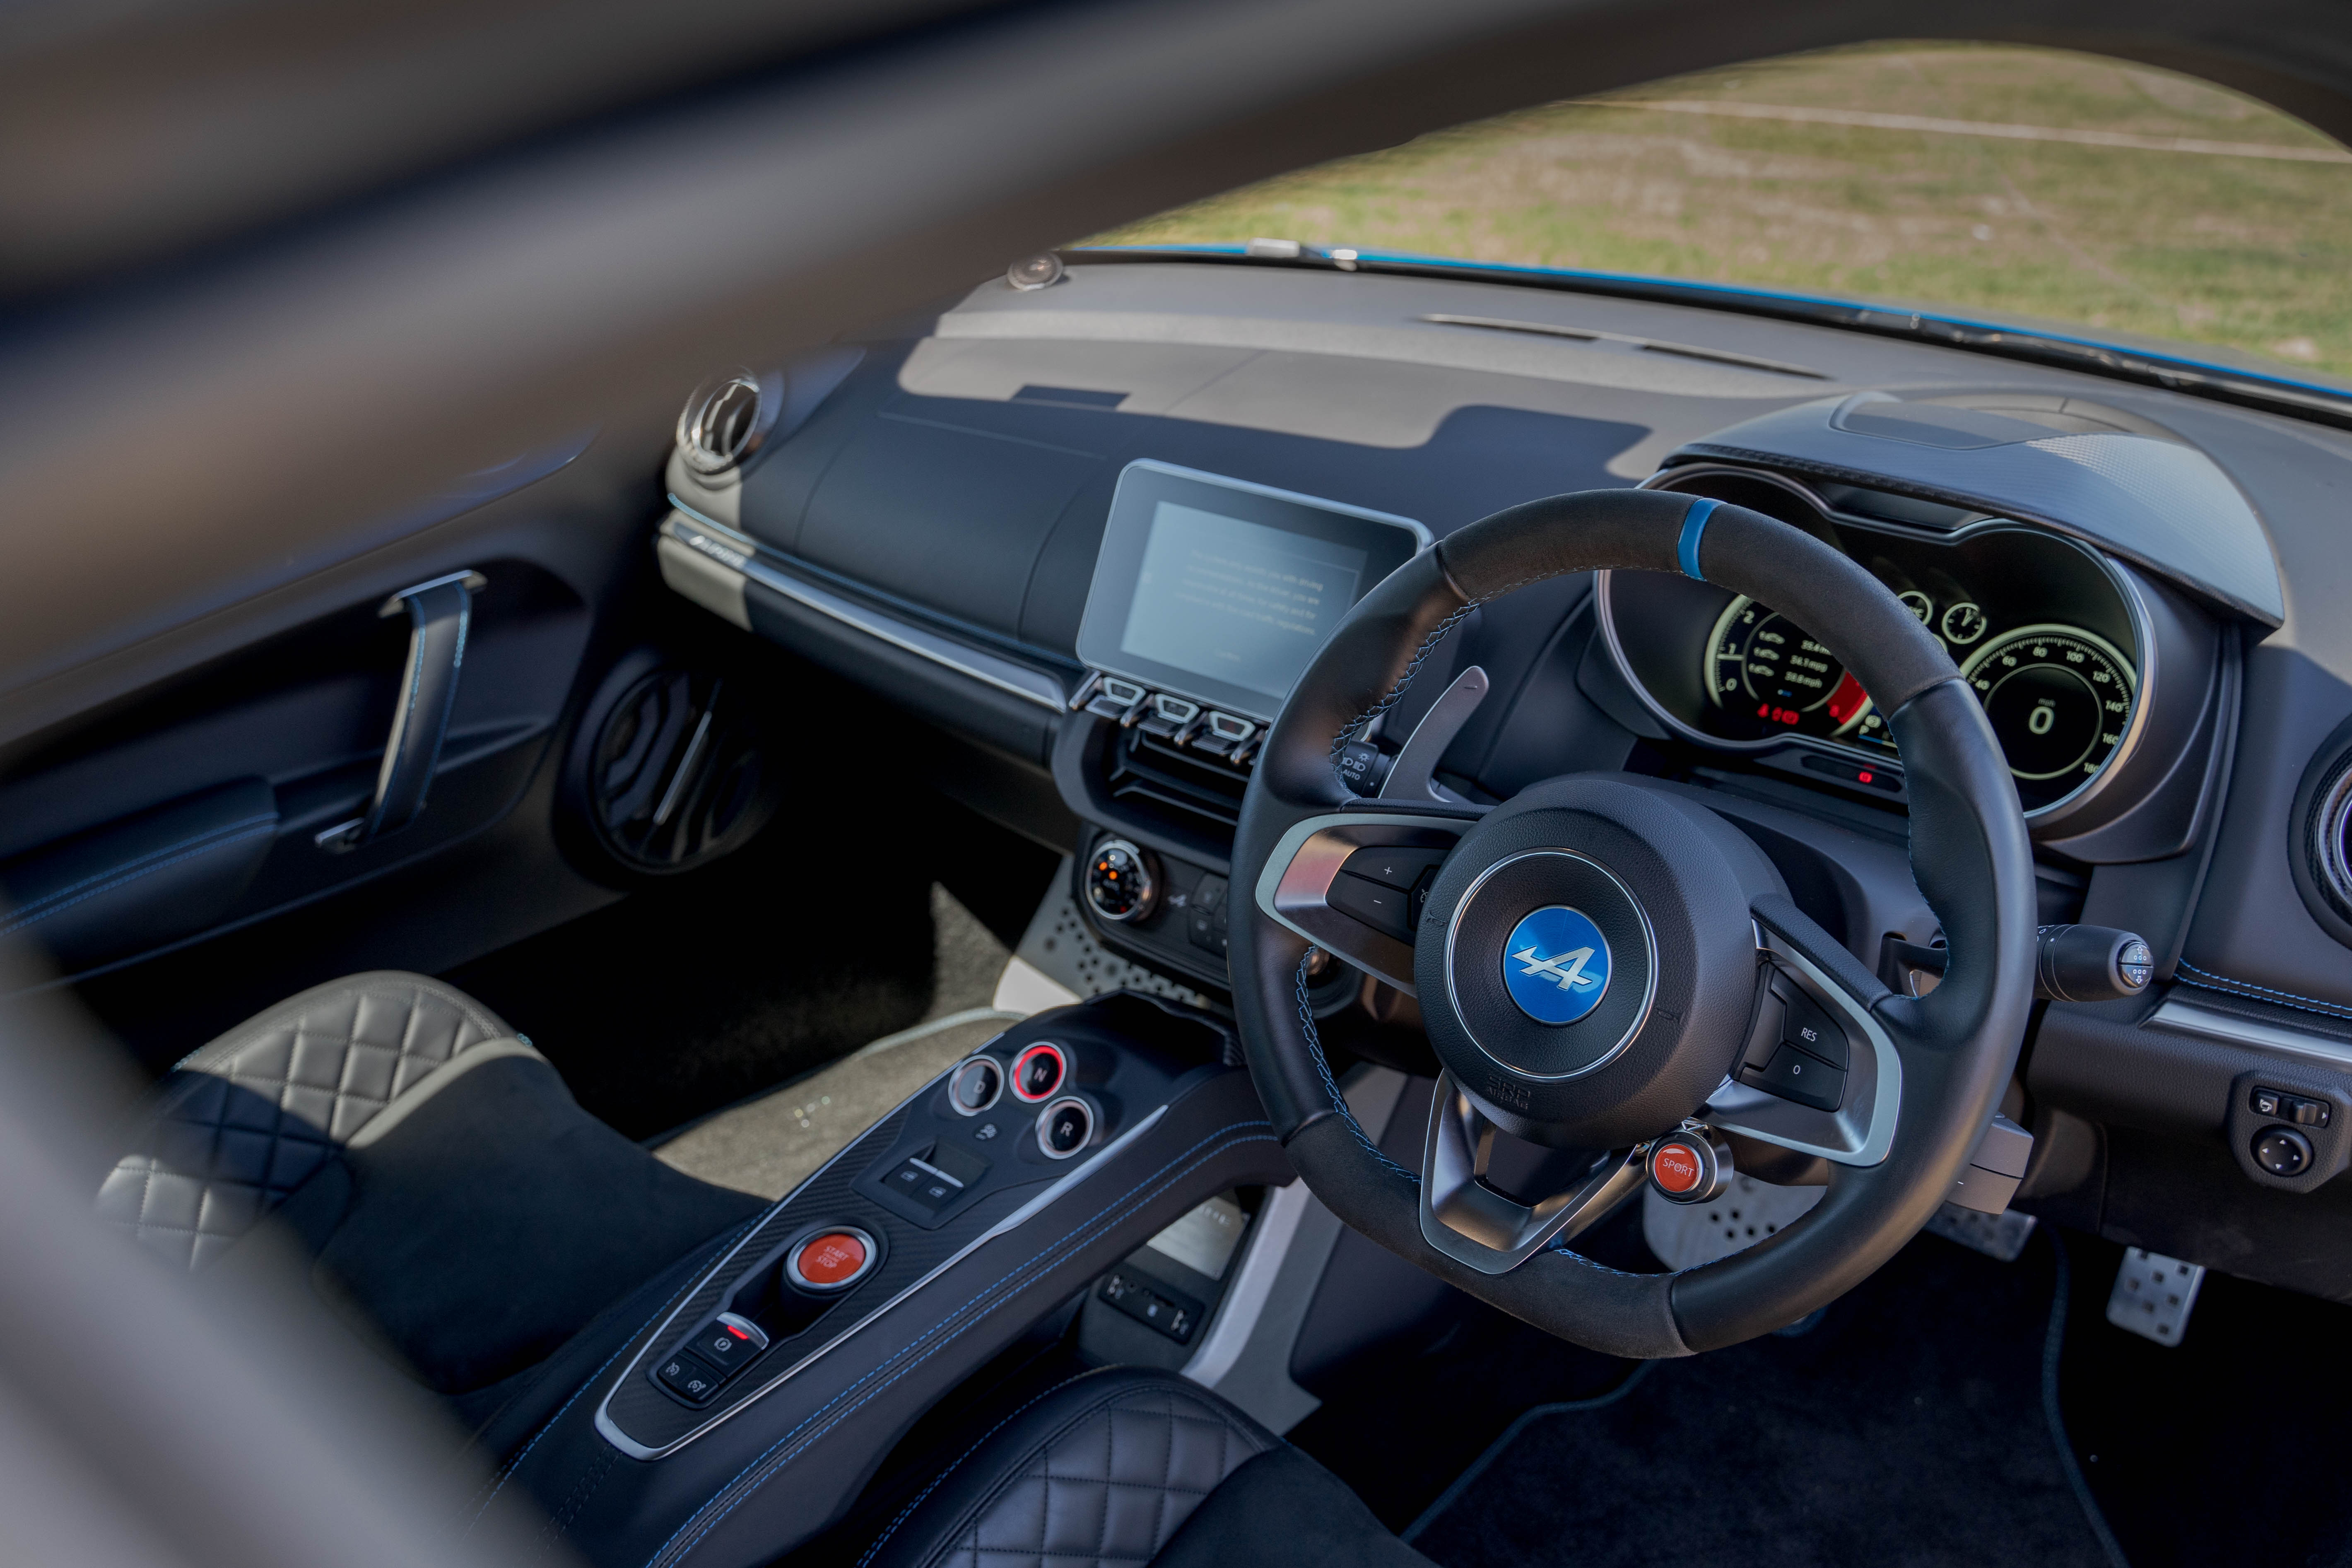 The Alpine's interior doesn't feature the best-quality materials 